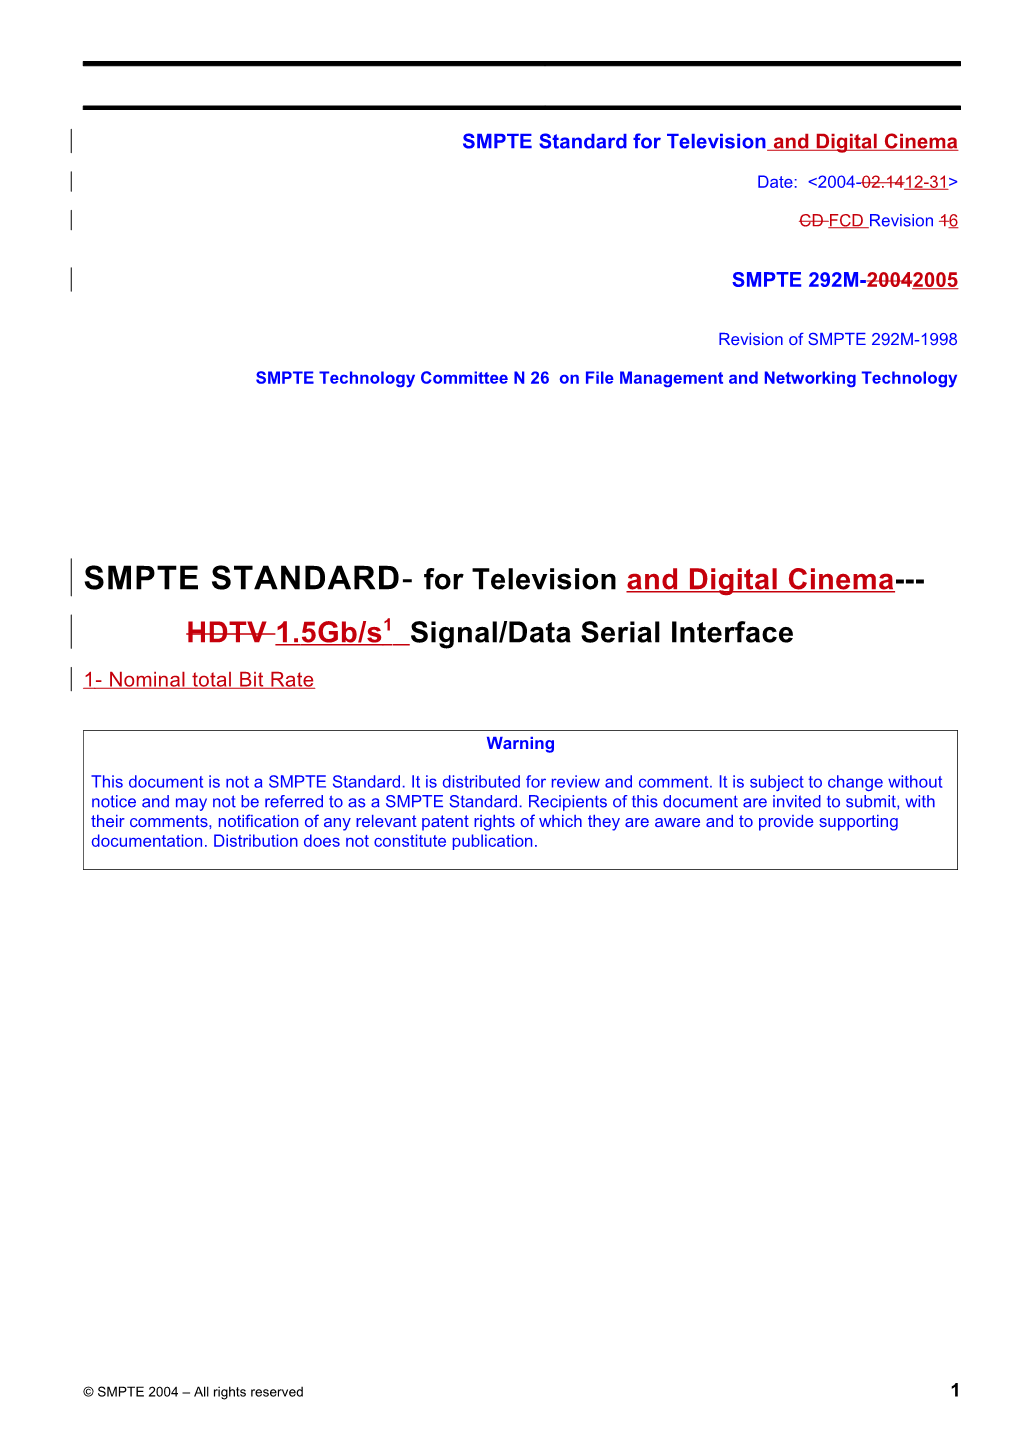 SMPTE 292M Serial Interface